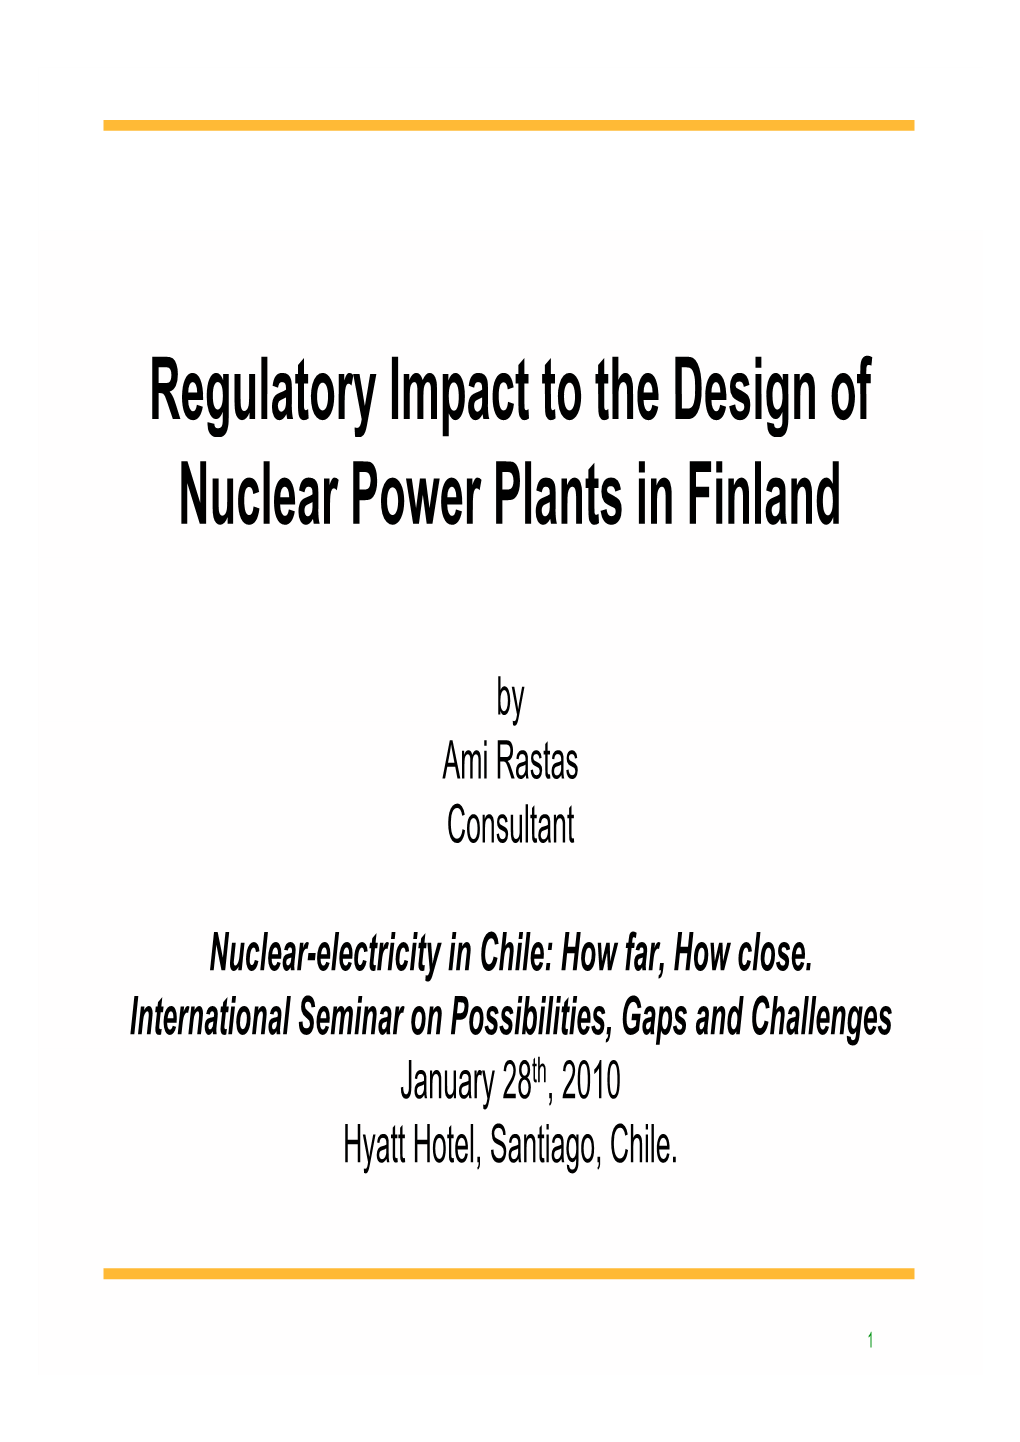 Examples of Regulatory Impacts to the Design of the Existing